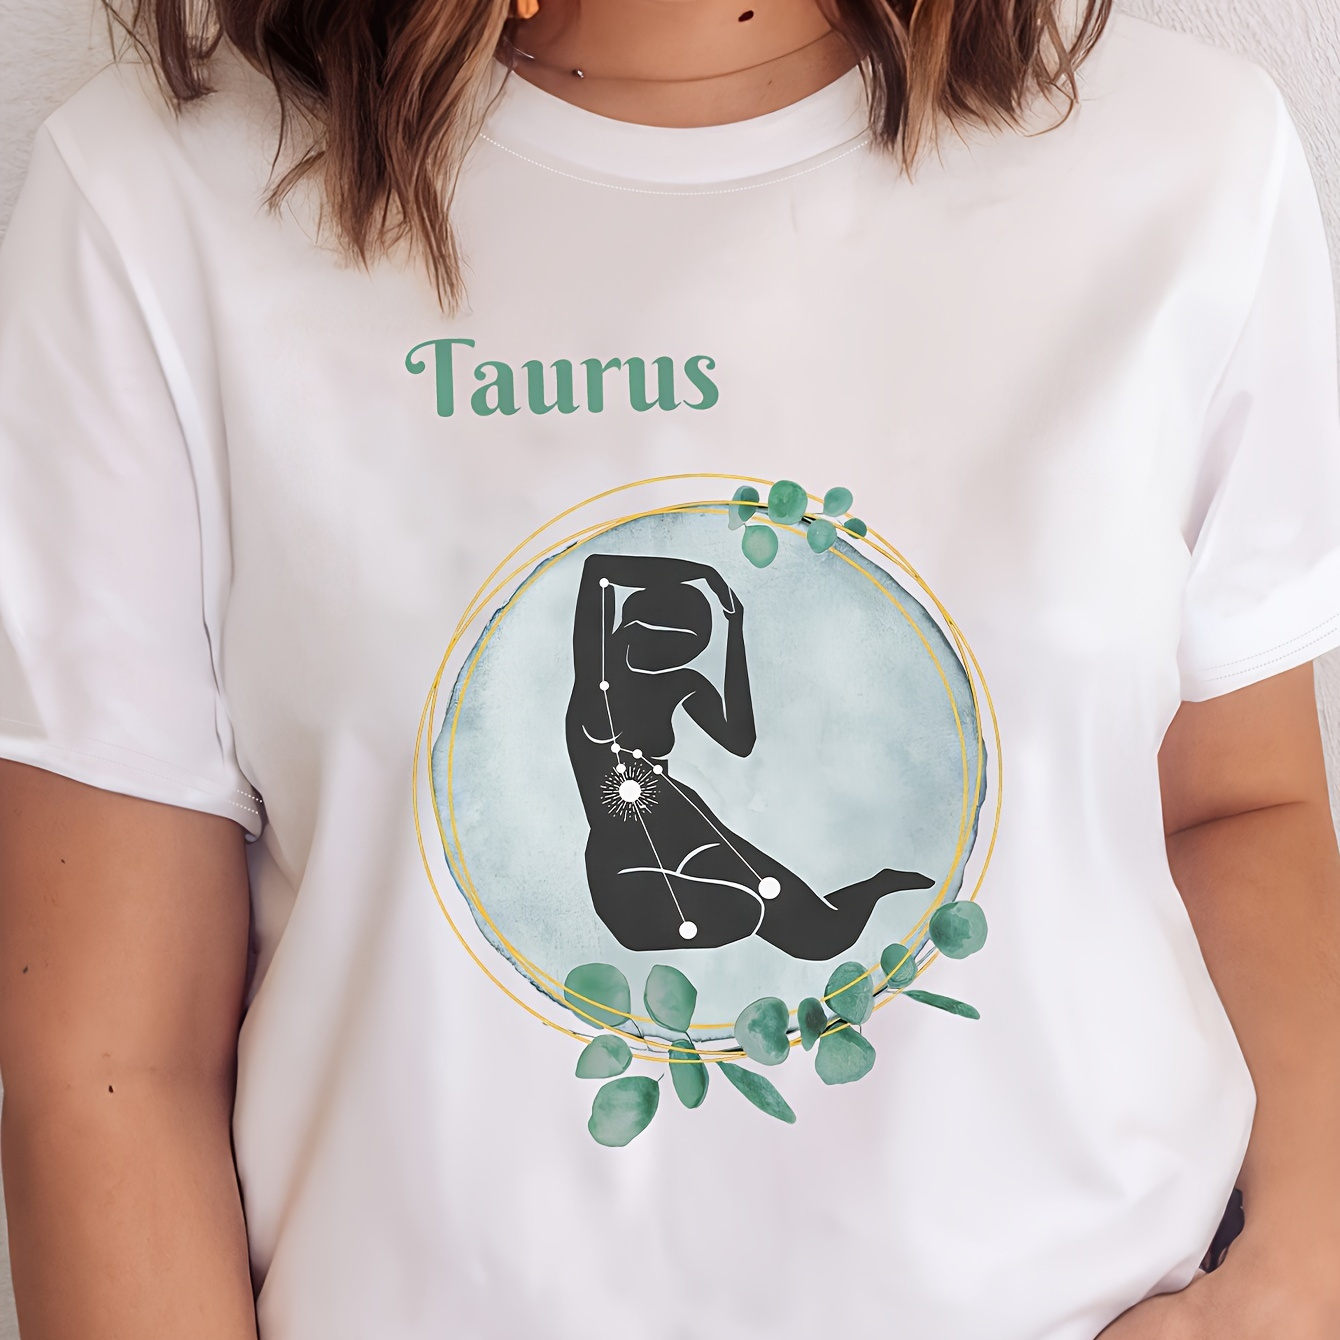 

Taurus Graphic Print T-shirt, Short Sleeve Crew Neck Casual Top For Summer & Spring, Women's Clothing